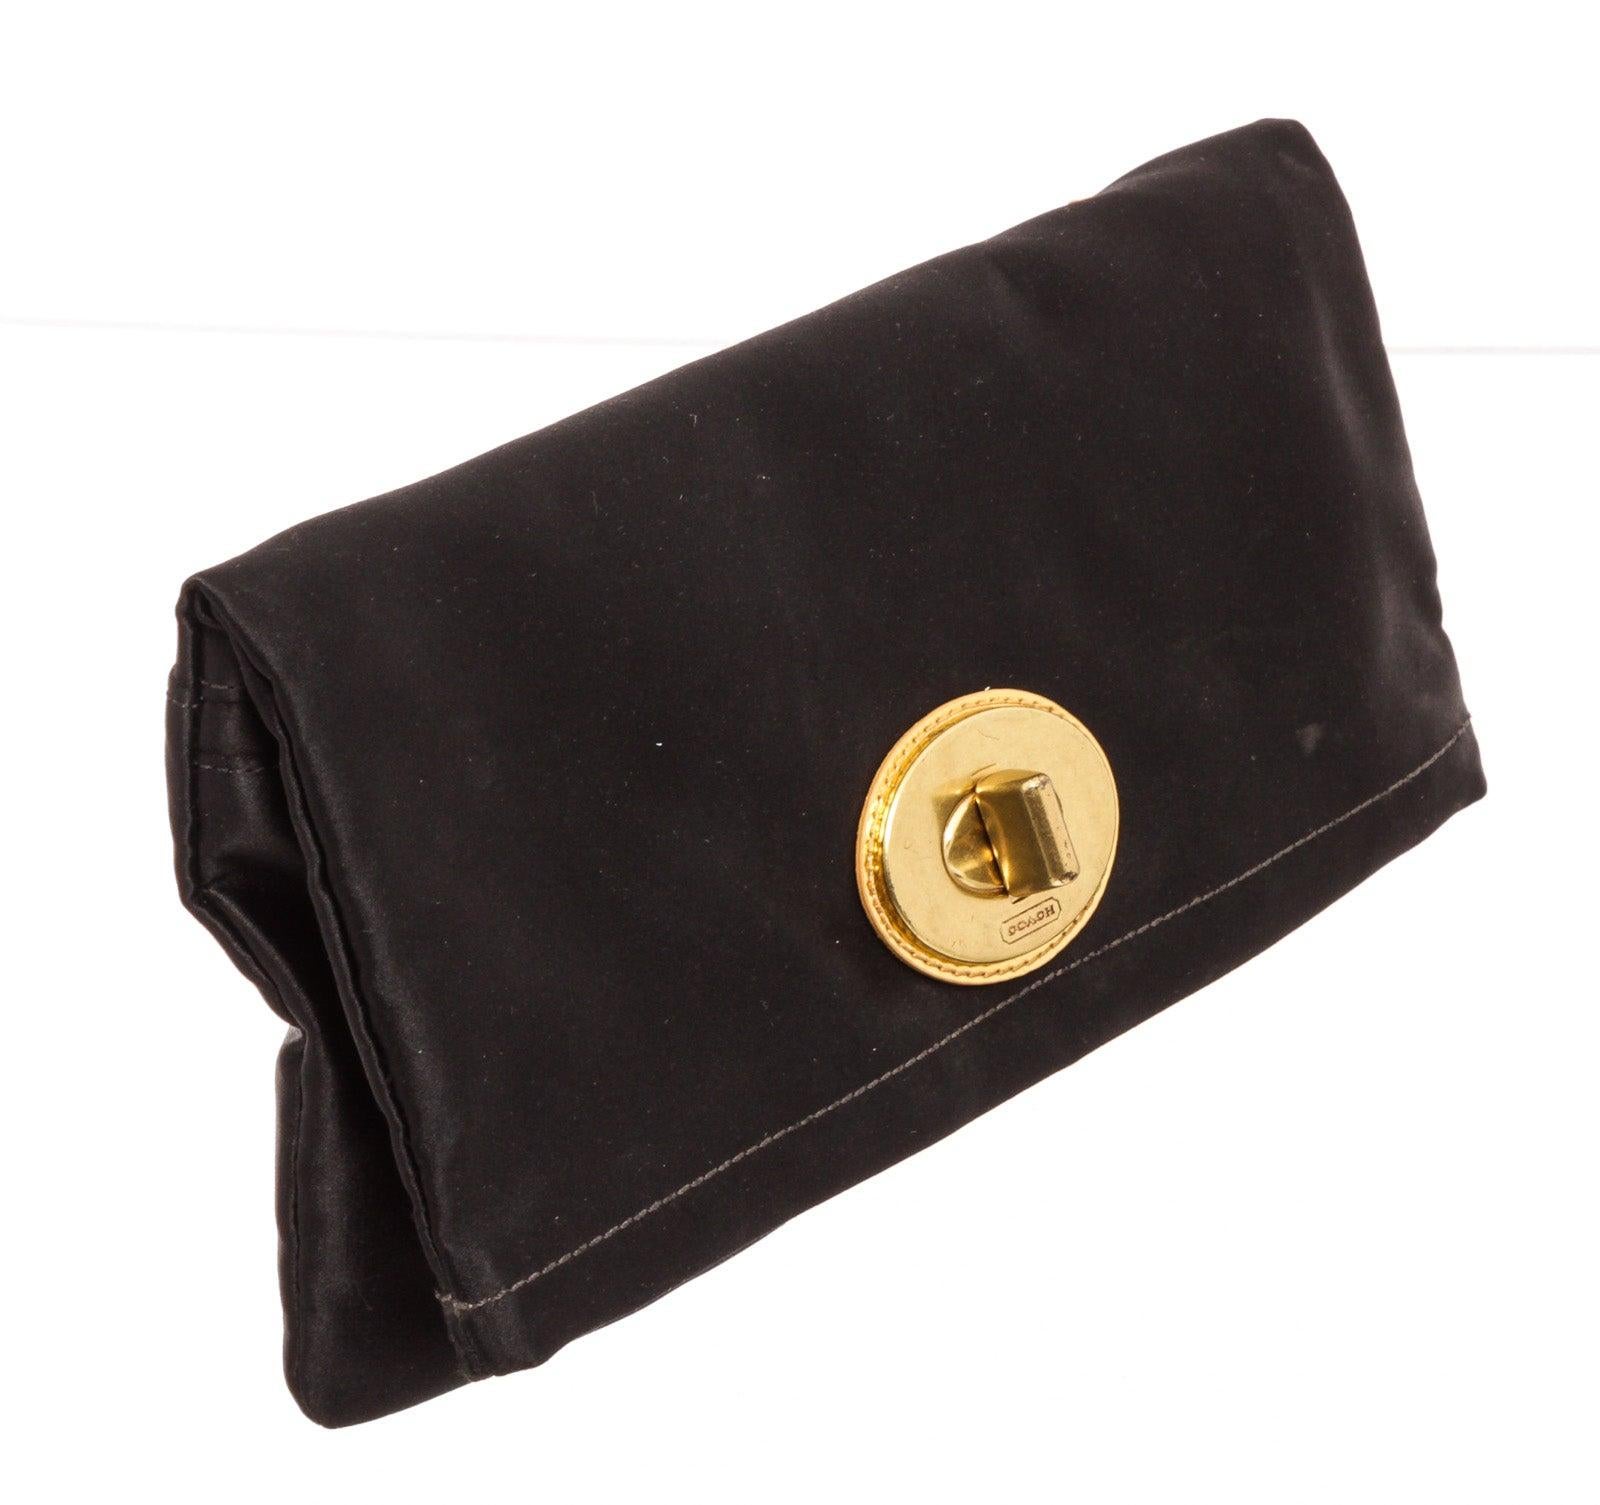 Coach black satin Amanda clutch with gold-tone hardware, logo placard at front, french purse pouch at back, two compartments under flap with zip closure, purple satin interior lining, and overall flap closure.
25094MSC